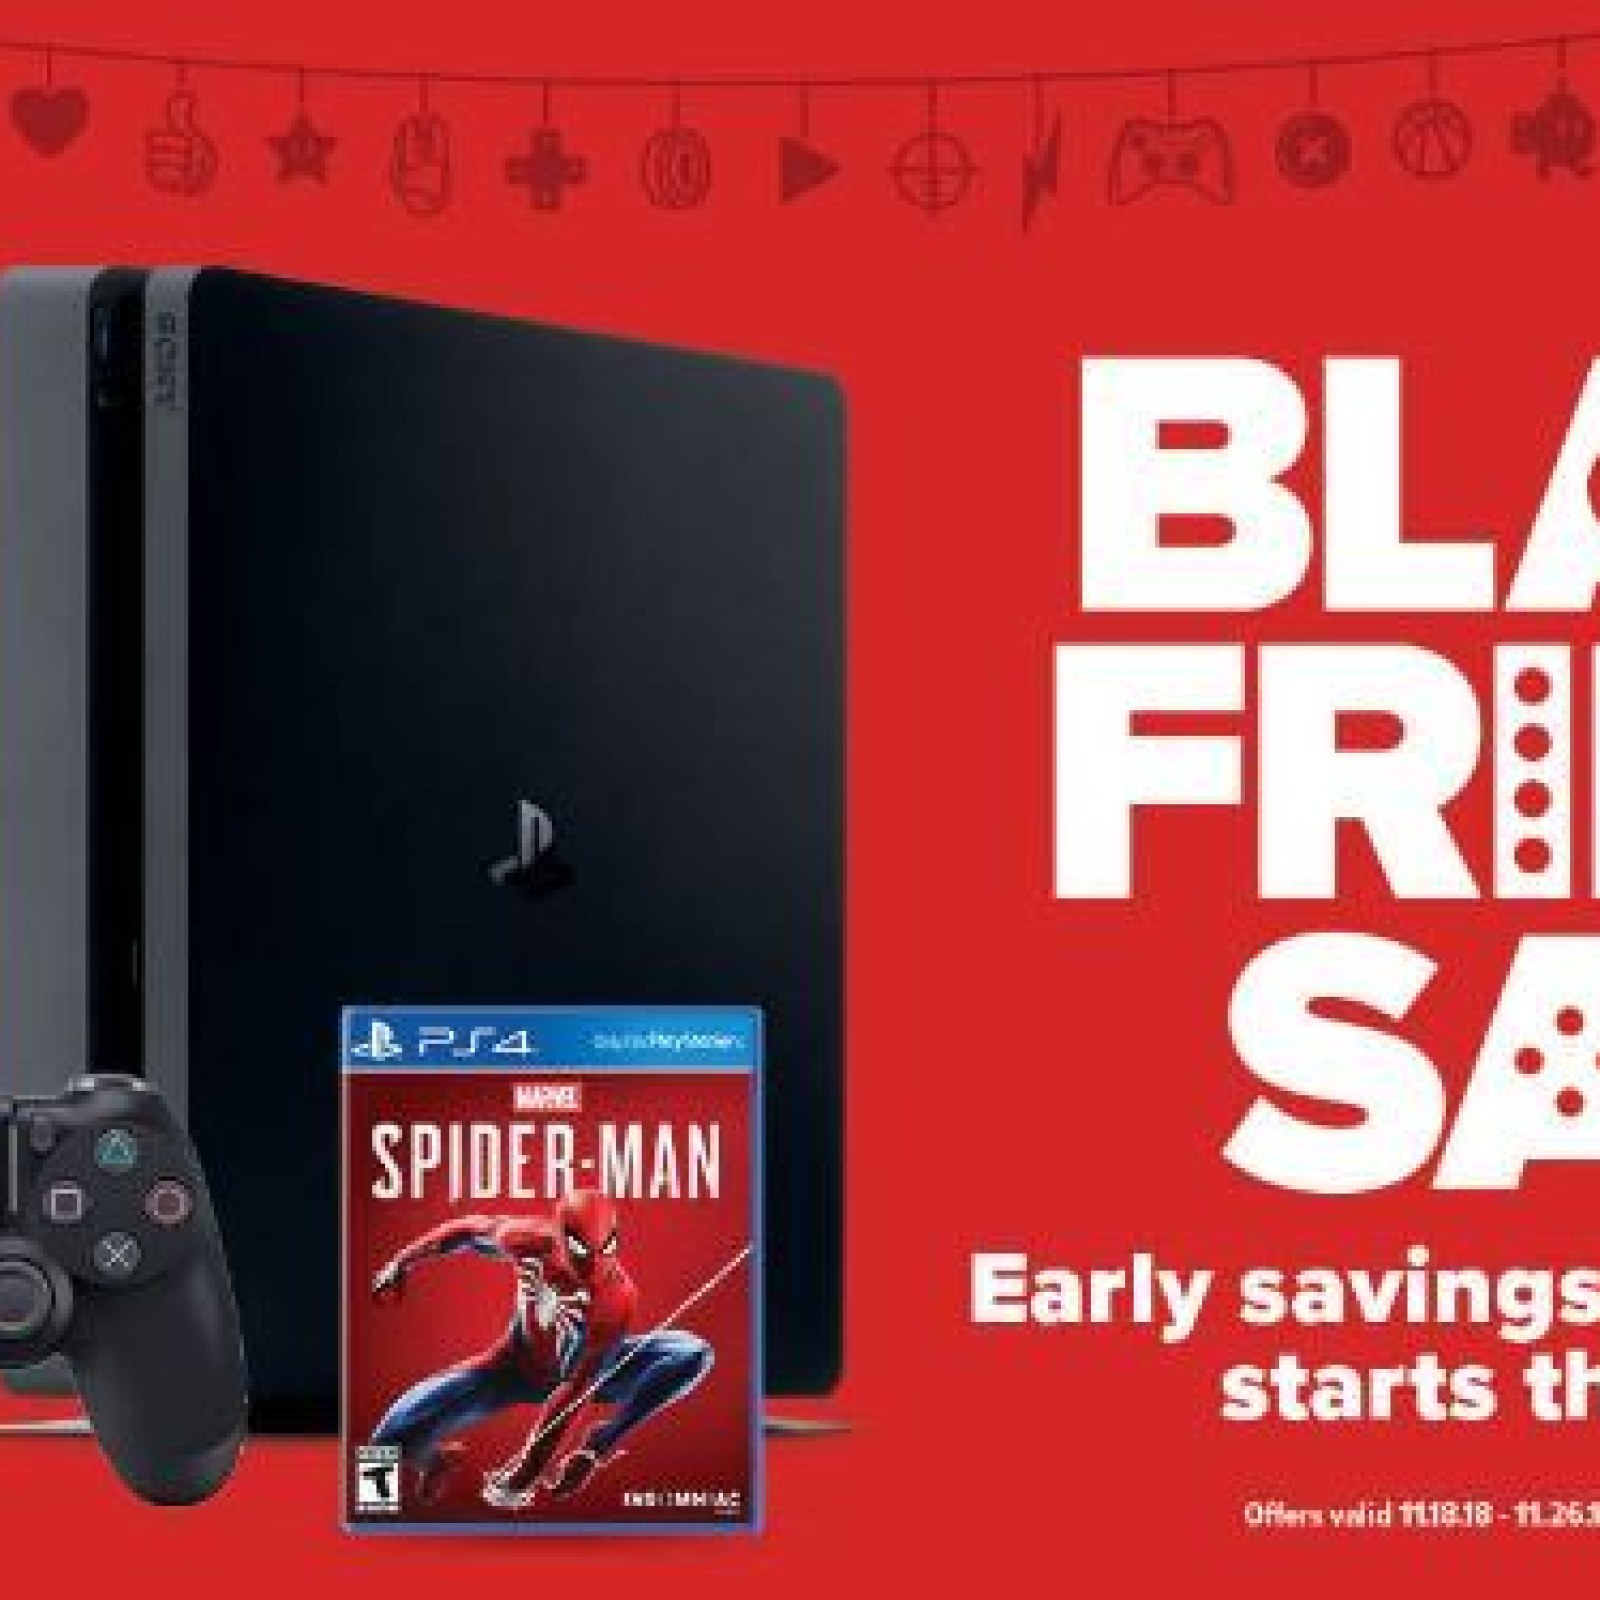 Gamestop Black Friday 2018 Deals Start Saving Early On Xbox One And Ps4 Bundles